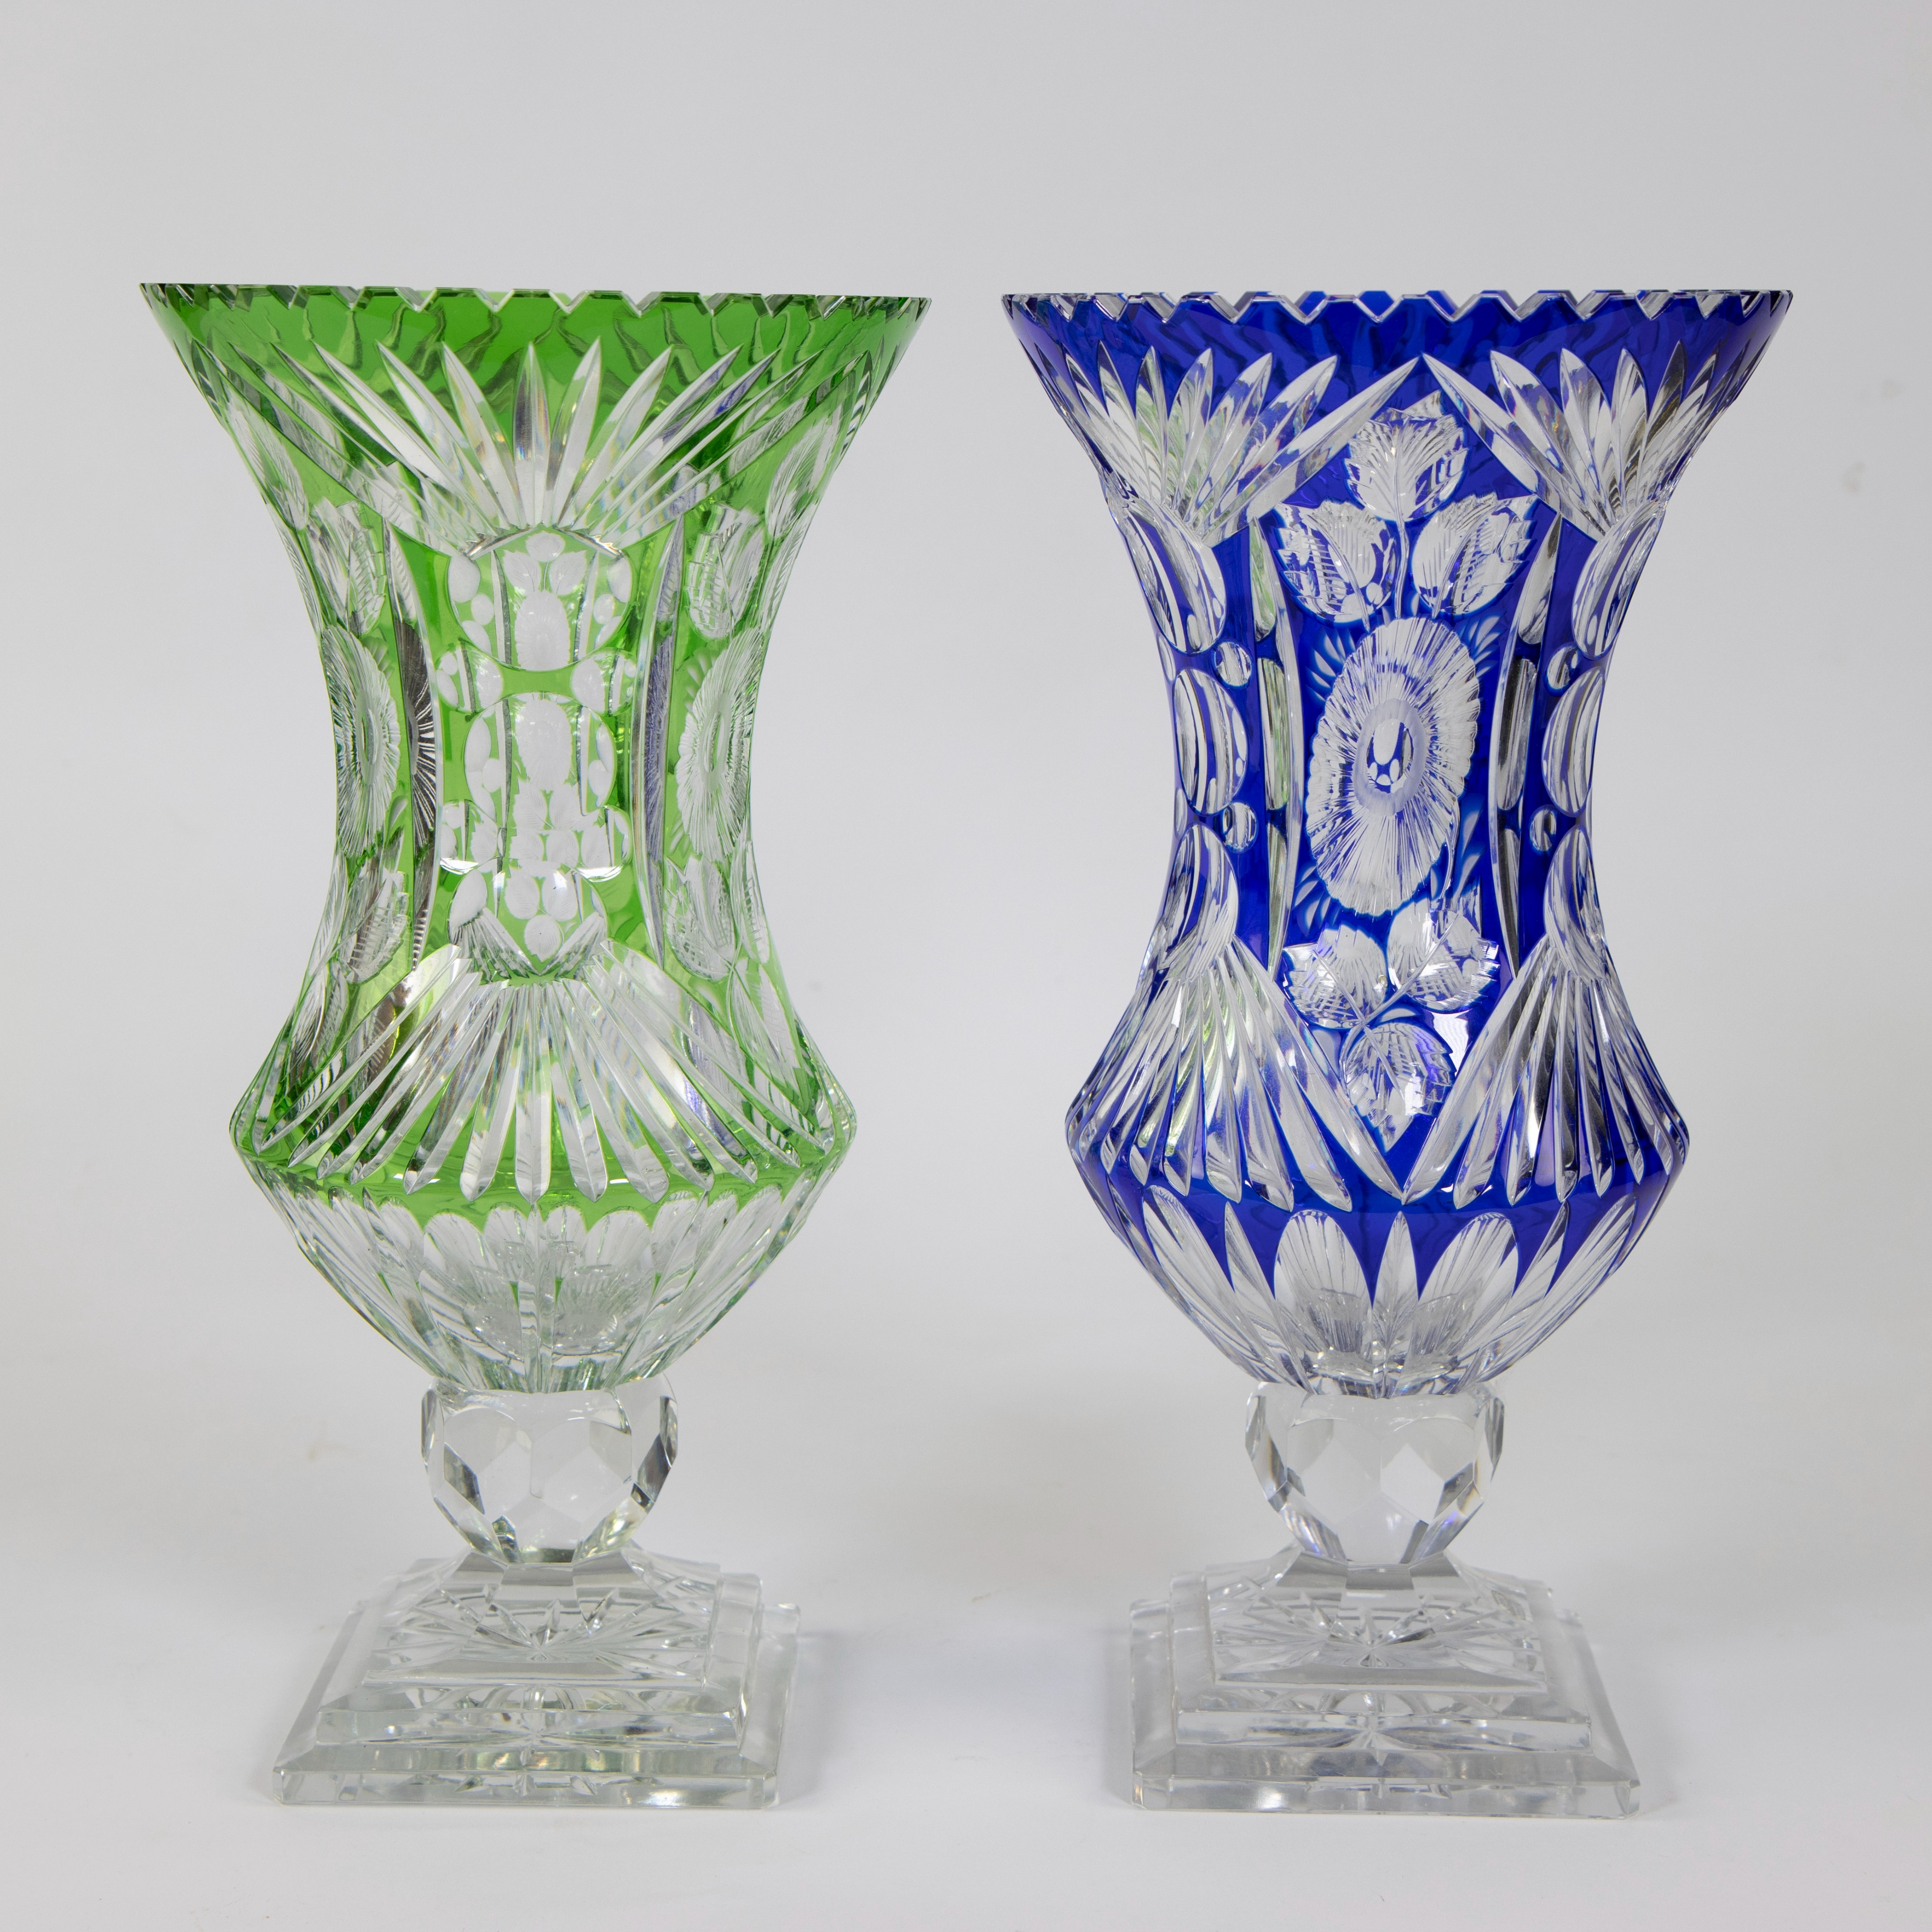 Collection of 2 Bohemian crystal vases light green and cobalt blue - Image 3 of 4